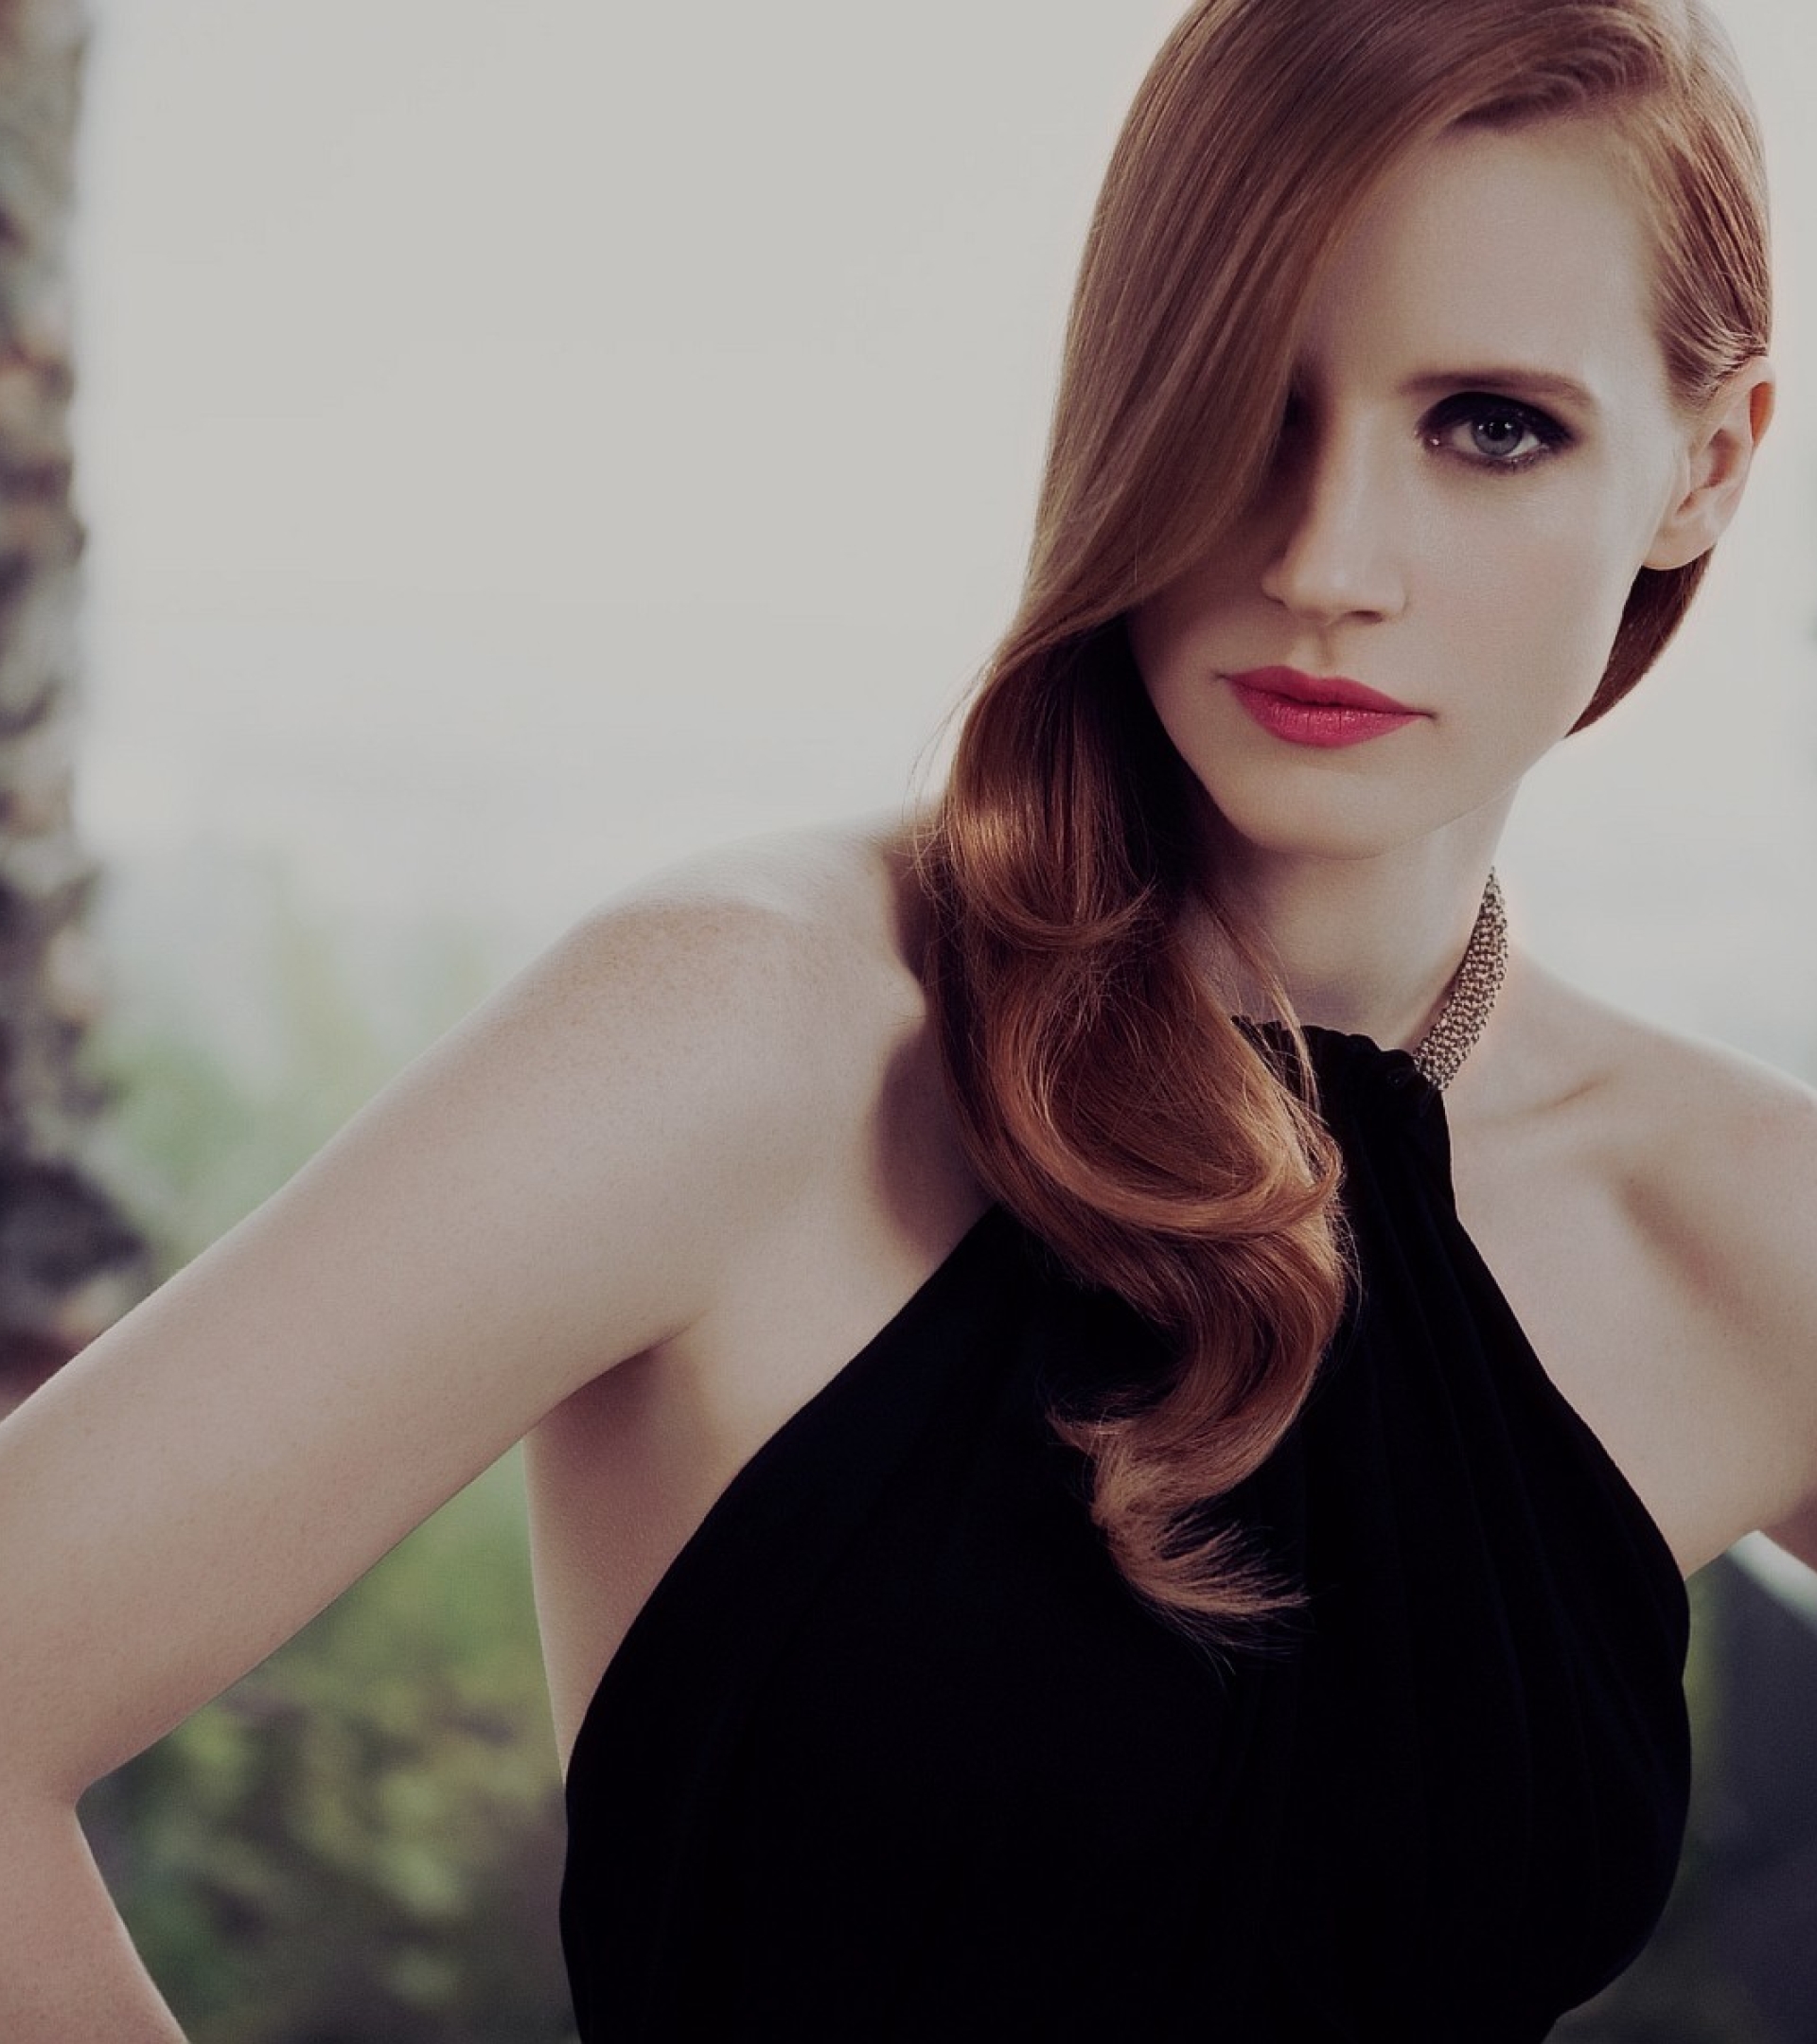 1920x2160 Resolution Jessica Chastain Images 1920x2160 Resolution Wallpaper Wallpapers Den 6990